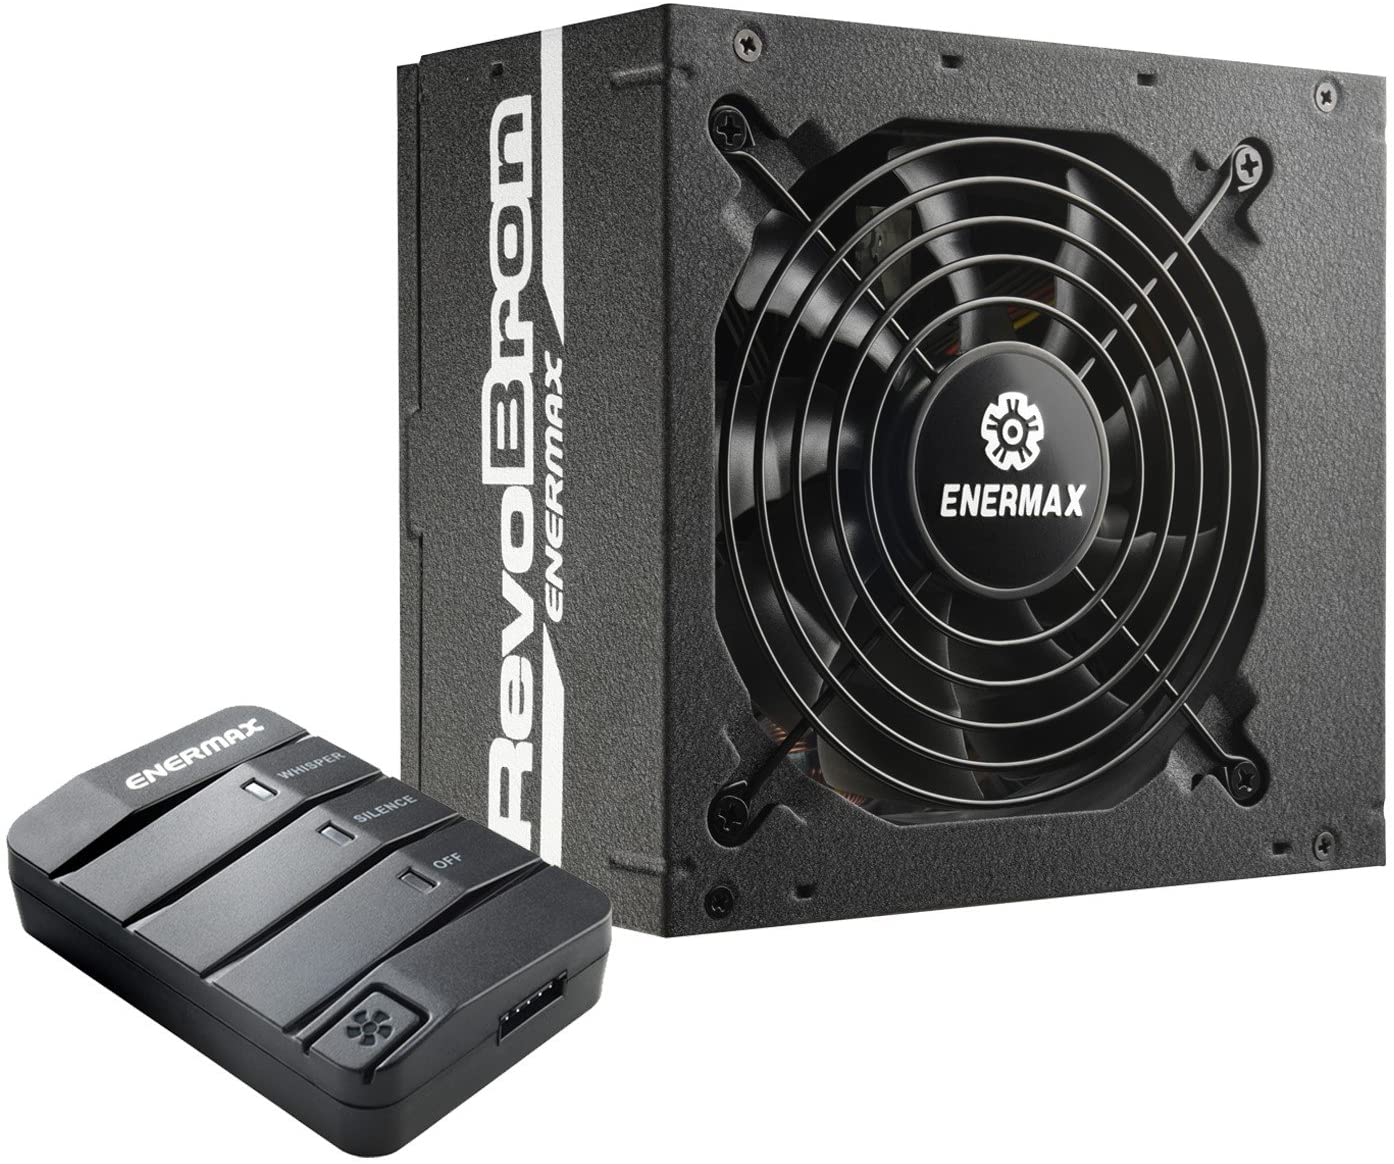 Enermax Revobron 500W 80+ Bronze Semi Modular Dust Free Rotation Technology Power Supply with Brand New Cooling Solution - COOLERGENIE Included, 5 Year NA Warranty , ERB500AWT